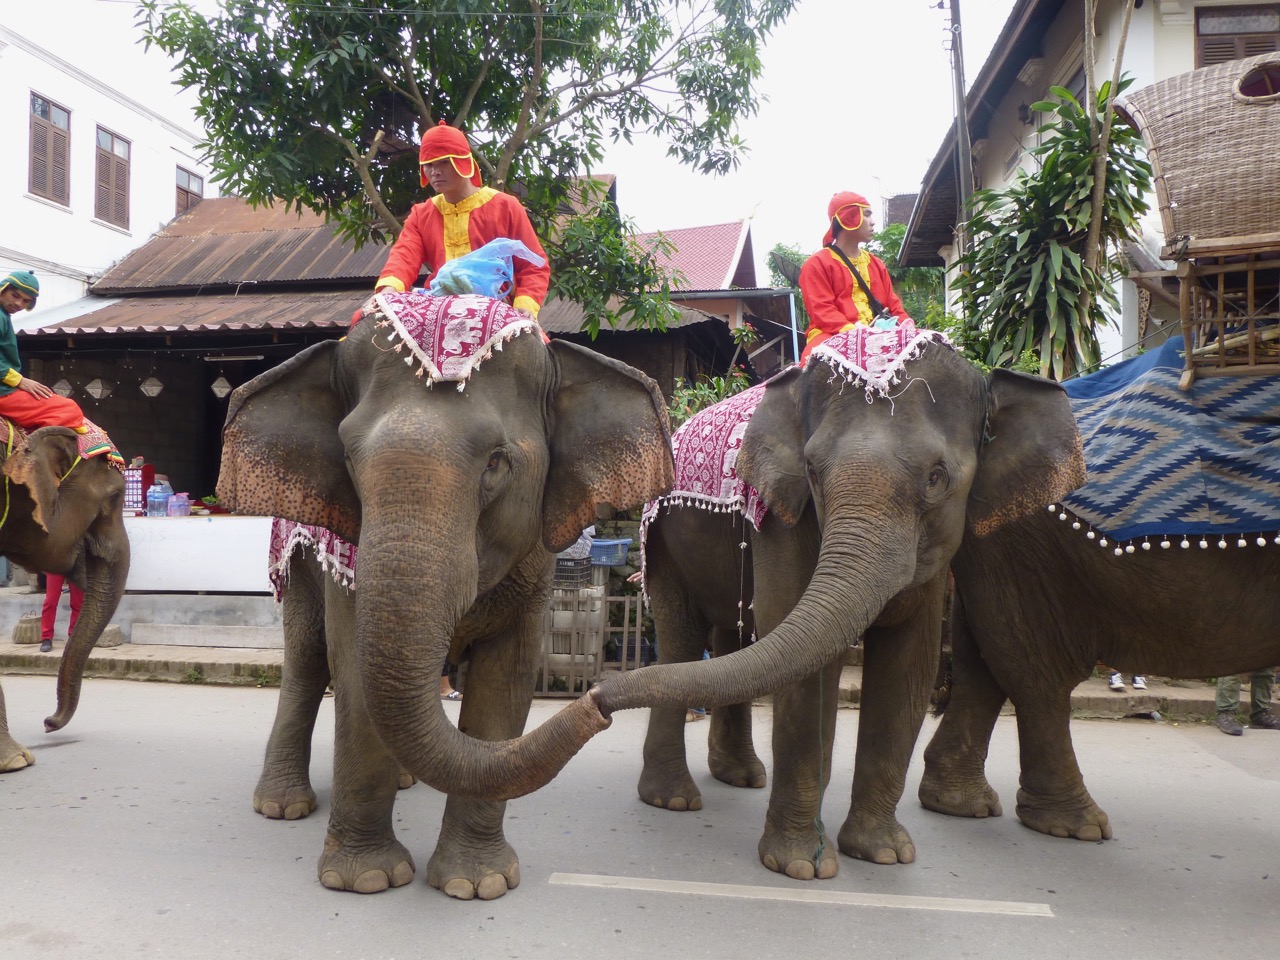 In Luang Prabang, Laos, two elephants connect during an elephant caravan that drew locals' attention to the illegal logging that threatens the country’s 900 remaining pachyderms. Photo by Erica Gies.